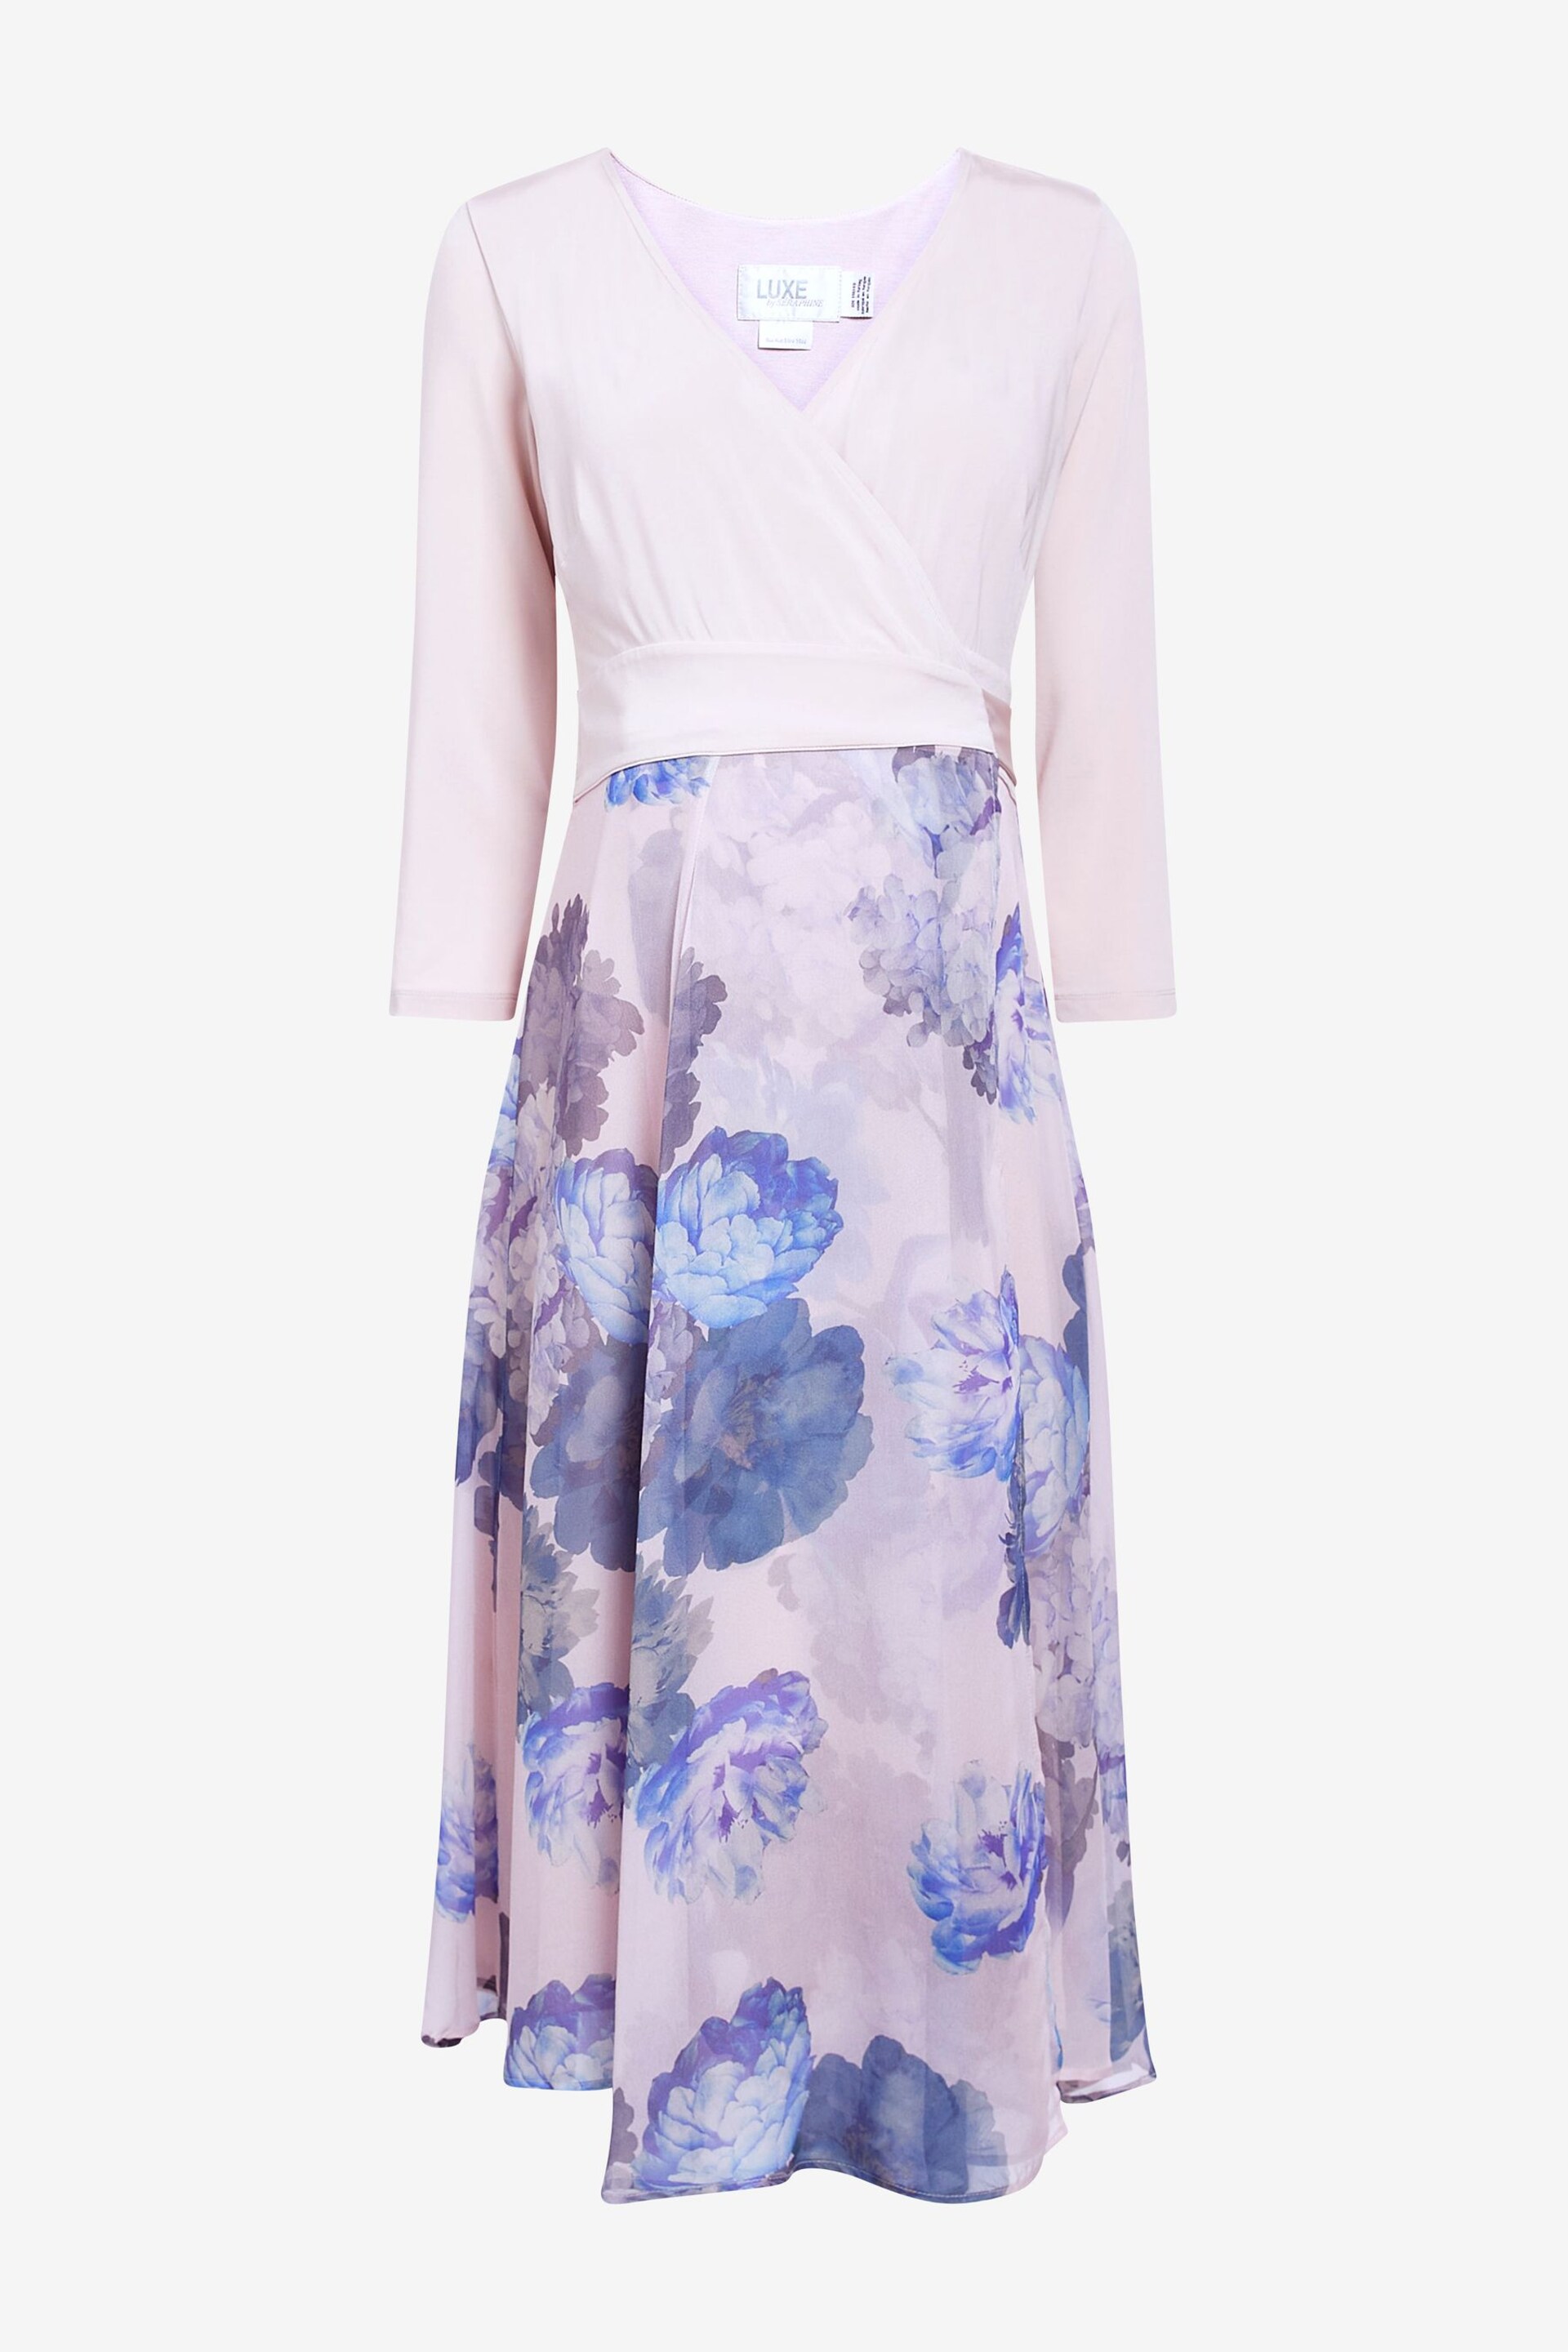 Seraphine Pink Pastel Floral Wrap Maternity And Nursing Midi Dress - Image 4 of 5